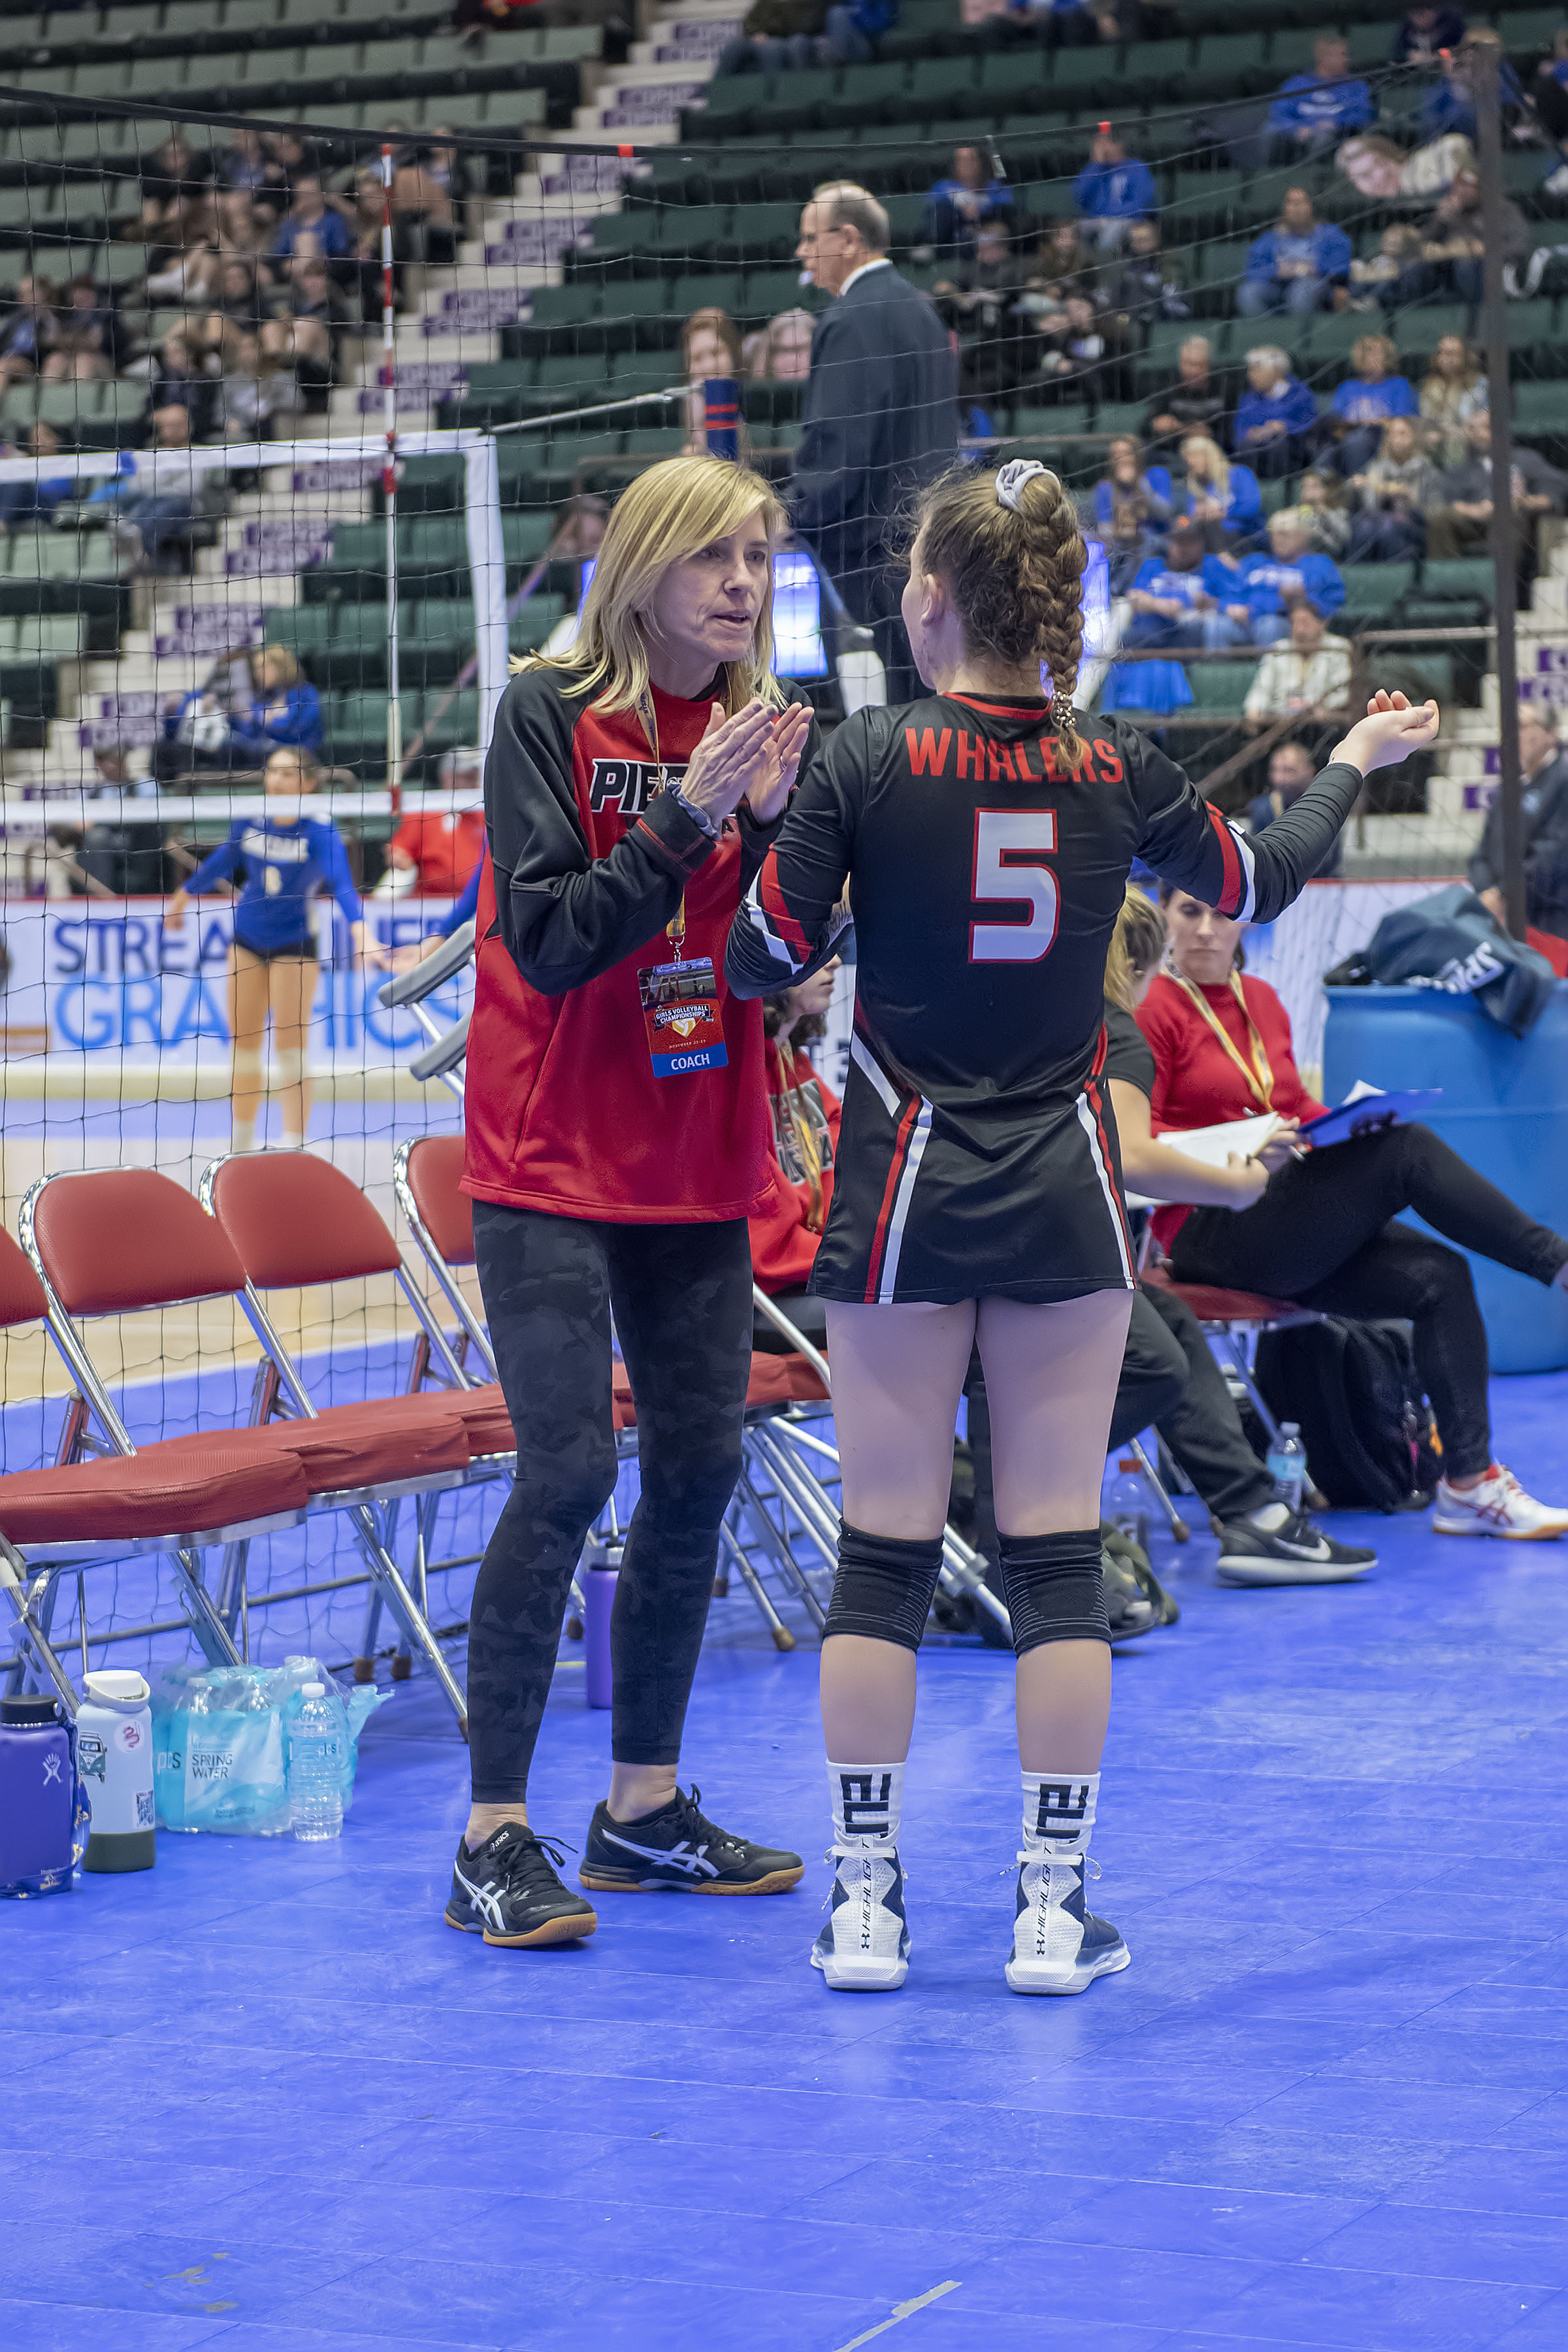 Pierson head coach Donna Fischer gives Sofia Mancino a pep talk during a timeout in the Lady Whalers' second match of the day against the Valhalla